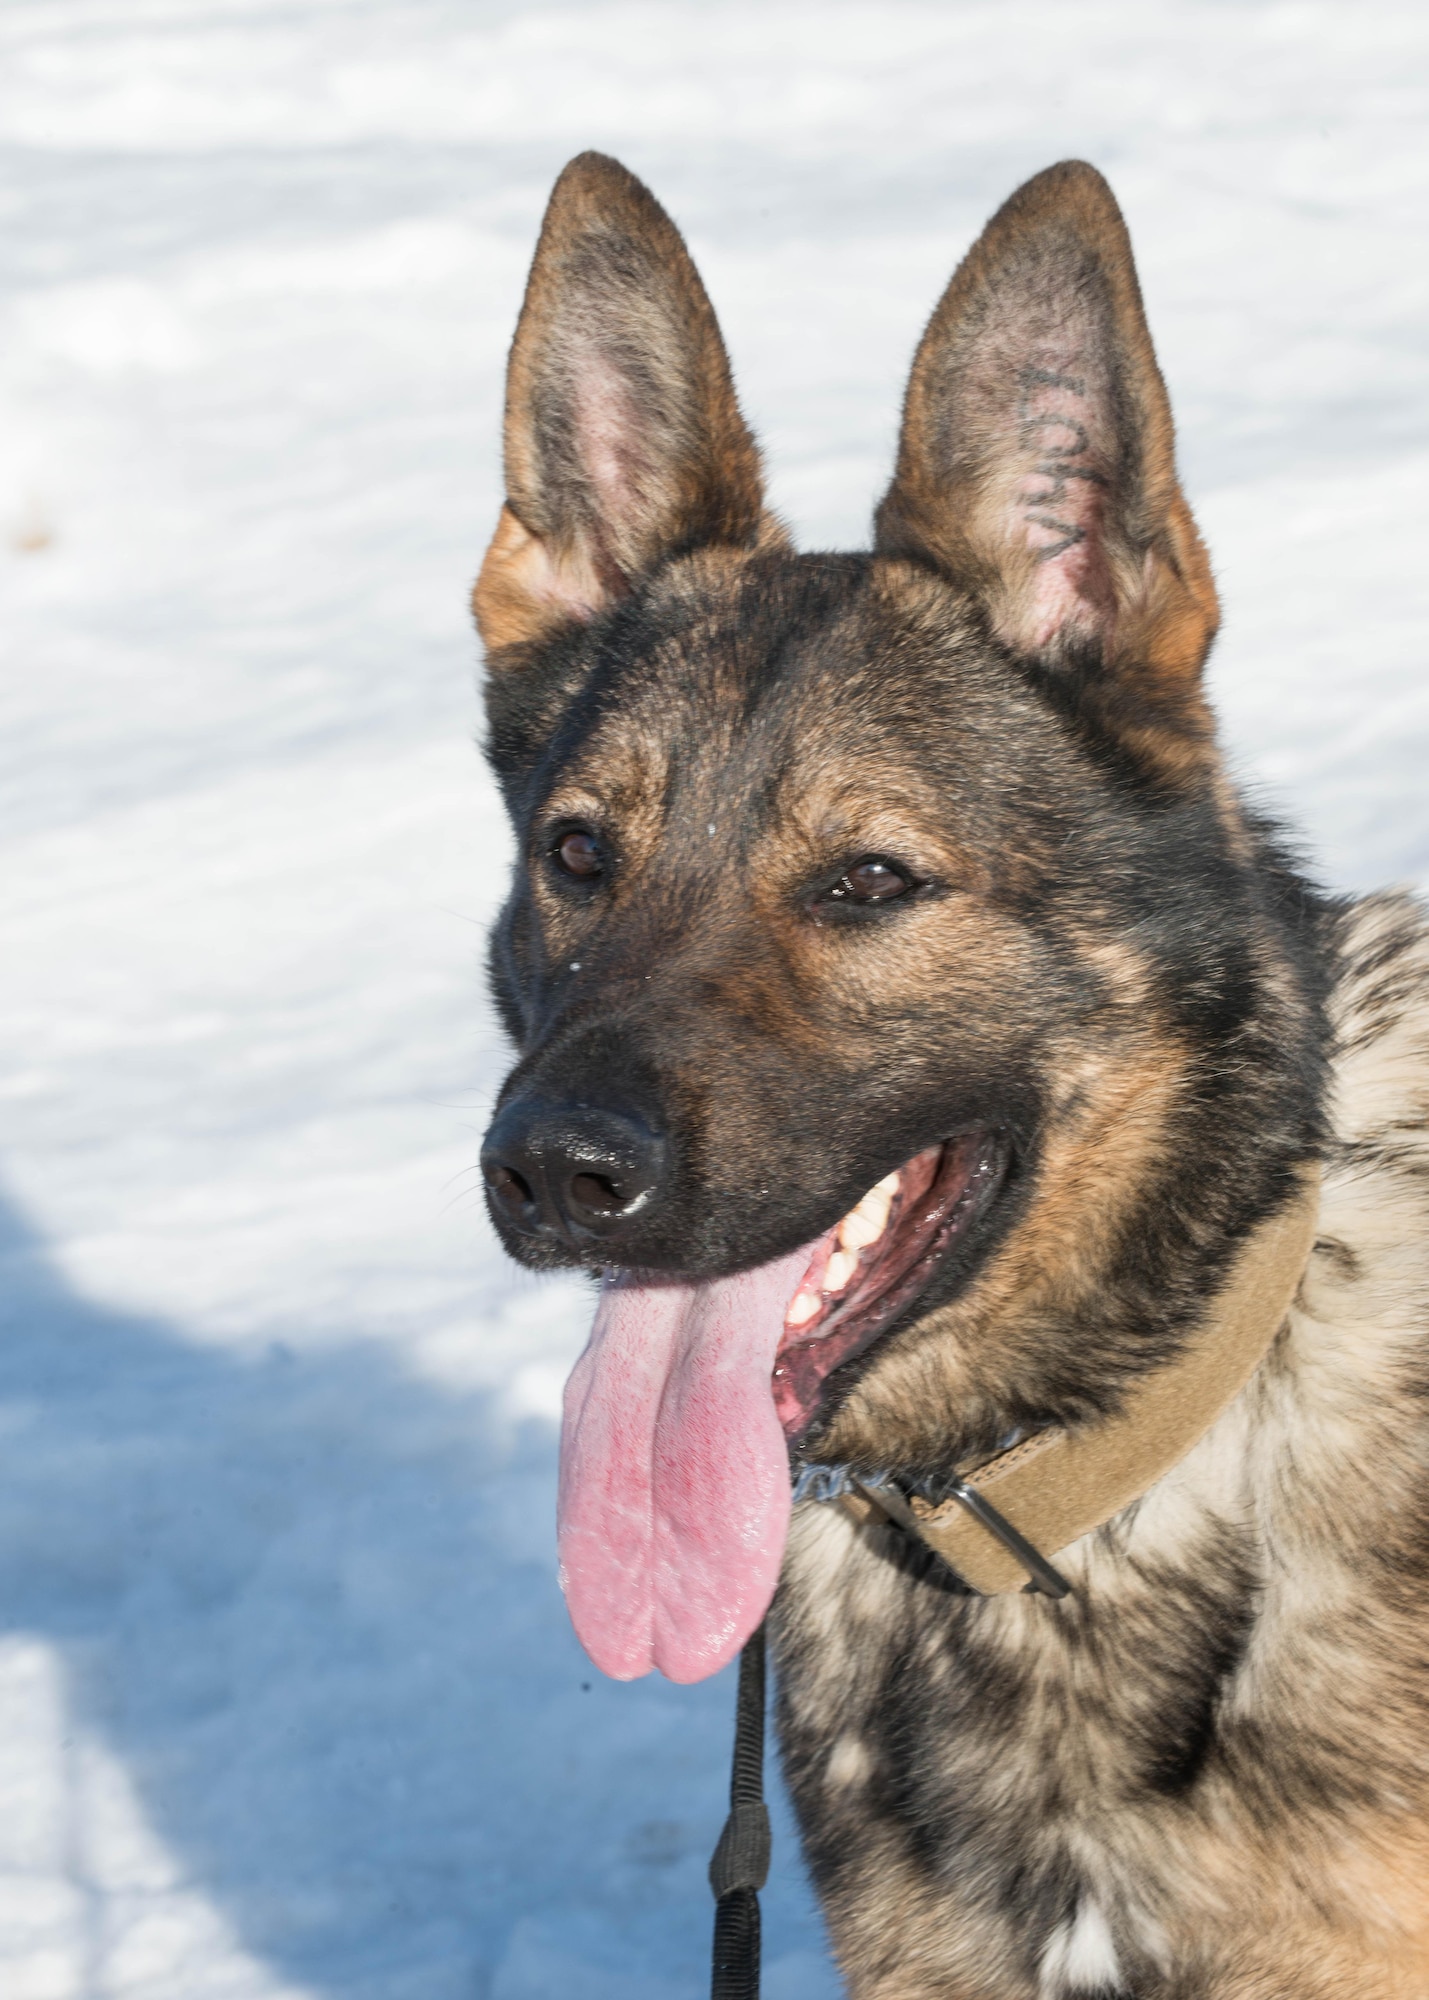 Cage, a 354th Security Forces Squadron military working dog (MWD), takes a break after working on basic commands in preparation for a building sweep March 7, 2016, at Eielson Air Force Base, Alaska. With below zero temperatures possible for more than half the year, MWD handlers break up training and sweeps between indoor and outdoor locations to protect the K-9’s unprotected paws. (U.S. Air Force photo by Staff Sgt. Shawn Nickel/Released)